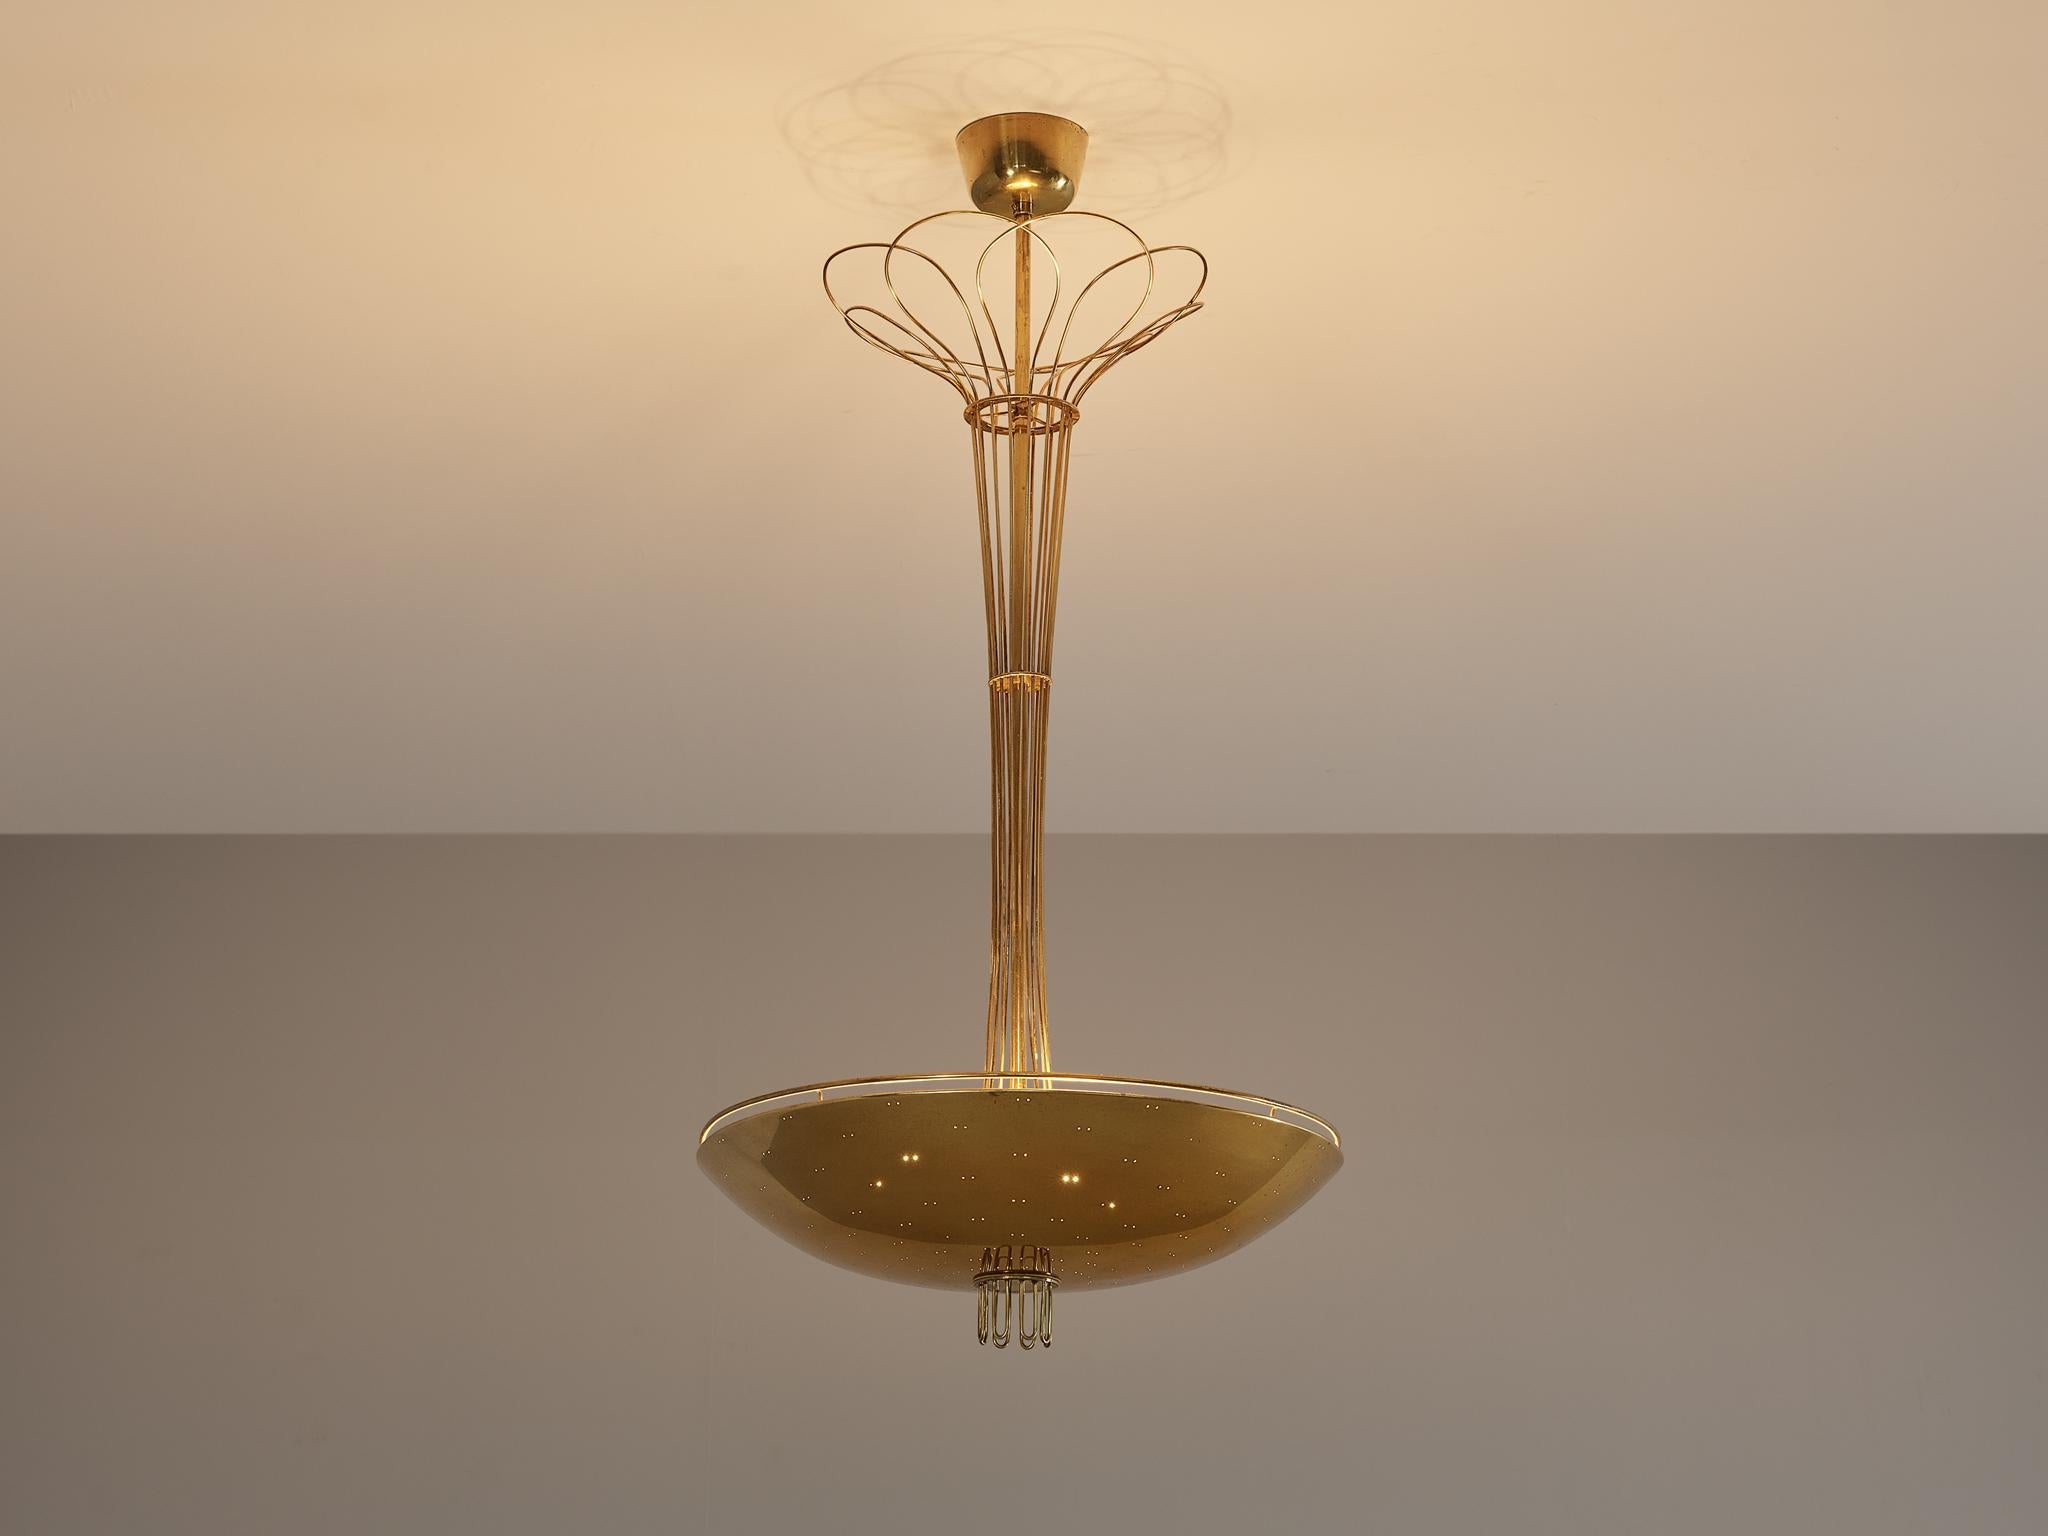 Paavo Tynell for Idman, chandelier, polished brass, perforated brass, Finland, circa 1950

This majestic chandelier is designed by the master in the fields of lighting Paavo Tynell for Idman around 1950. The original design of this particular model